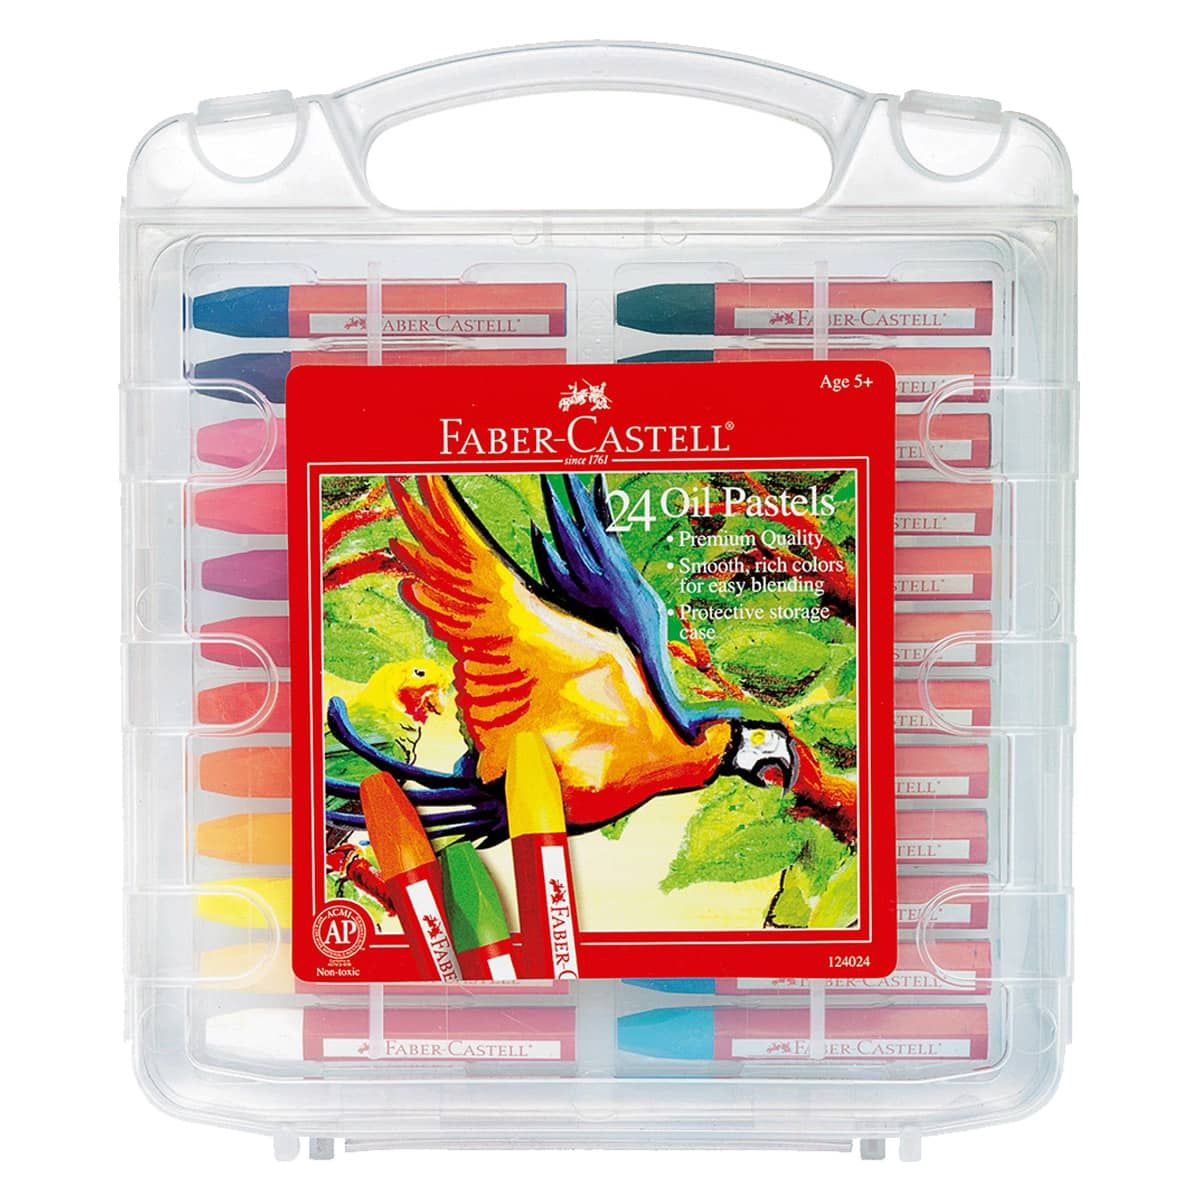 Faber-Castell Oil Pastels Set of 24, Assorted Colors